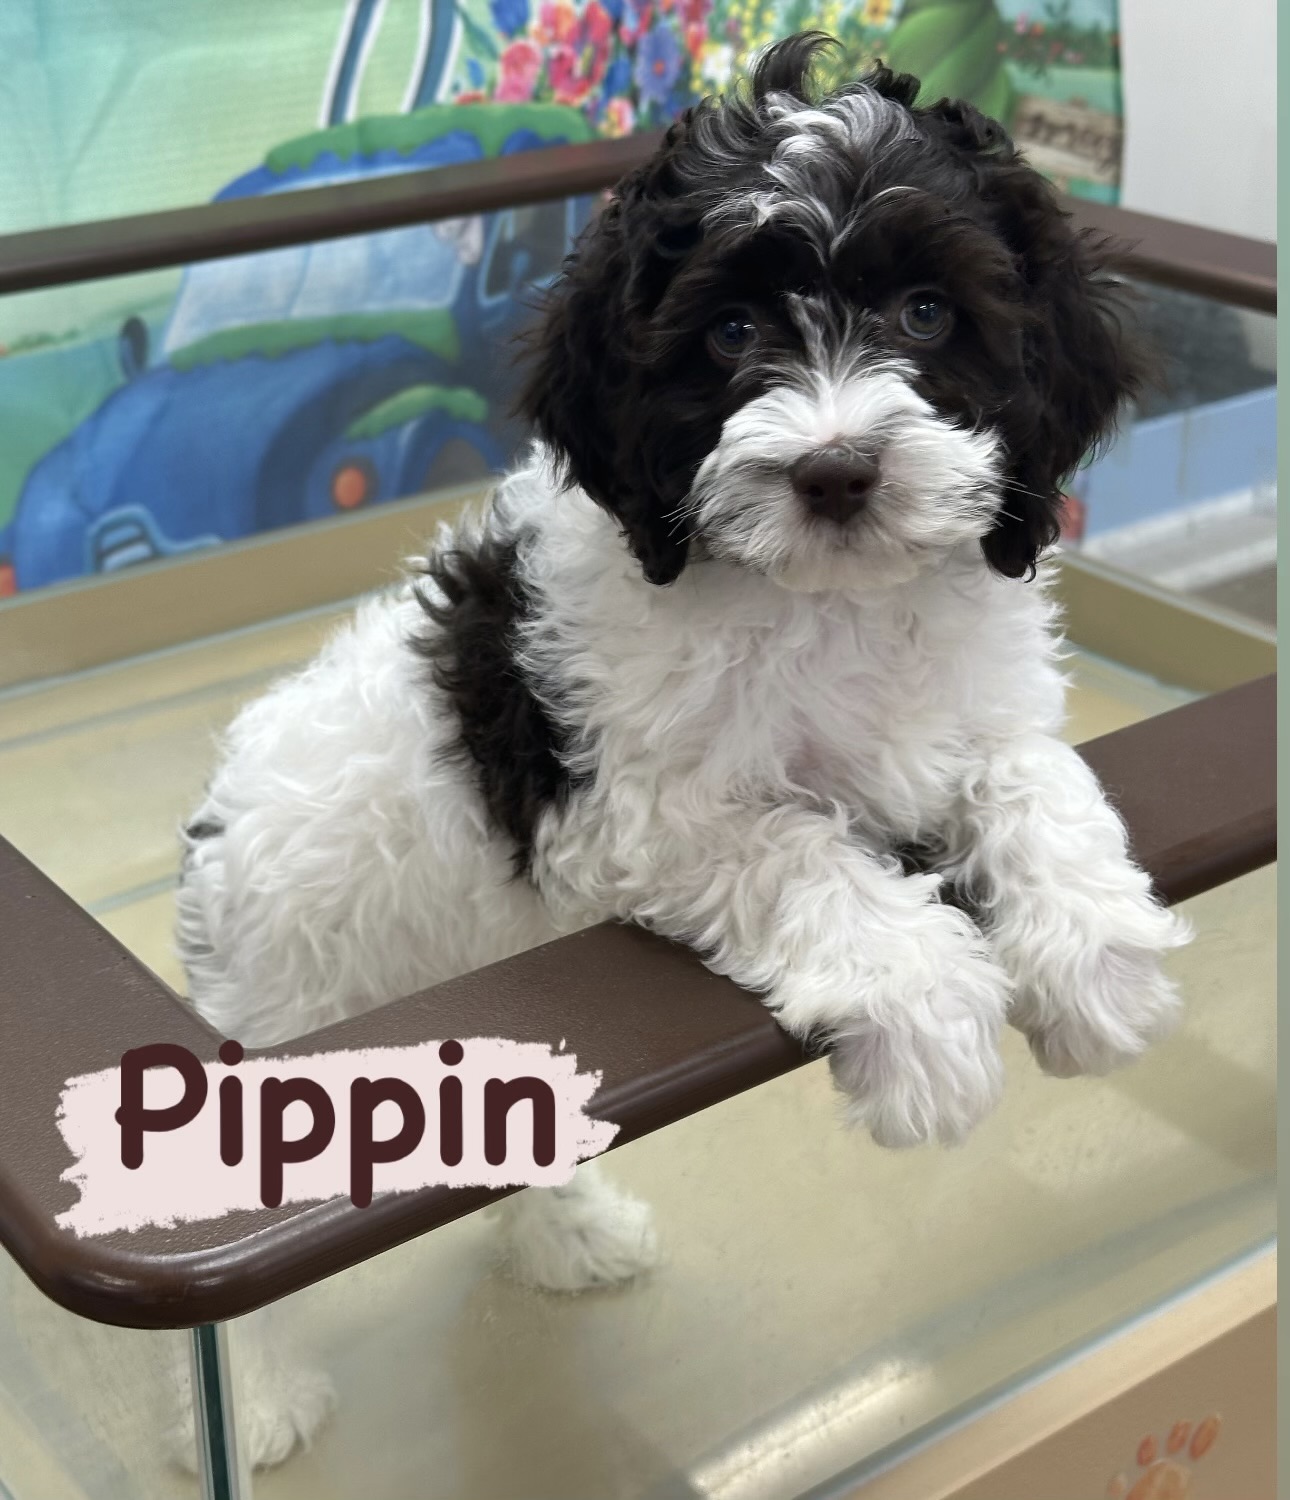 Brown and white parti poodle puppy in a brown plastic tub.